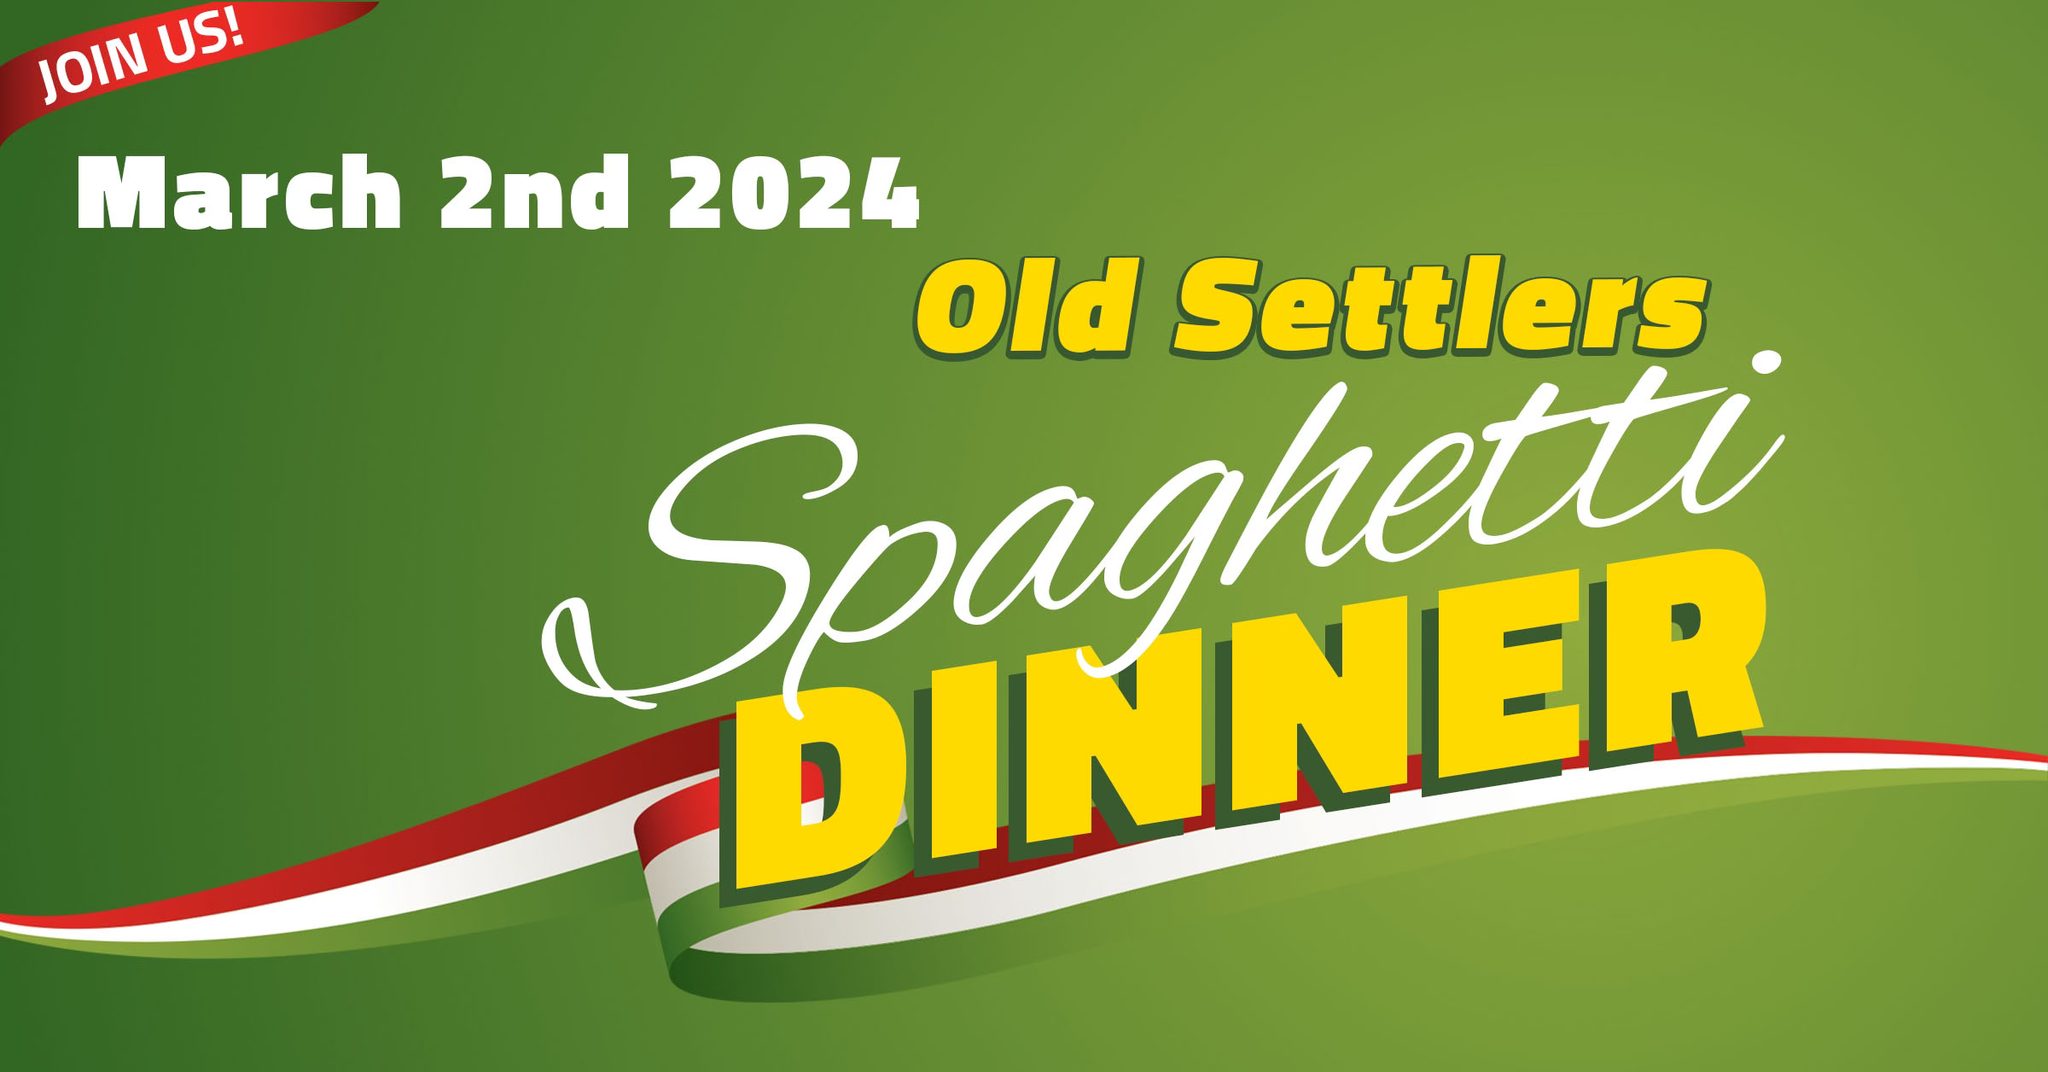 Event Promo Photo For Old Settlers Spaghetti Dinner